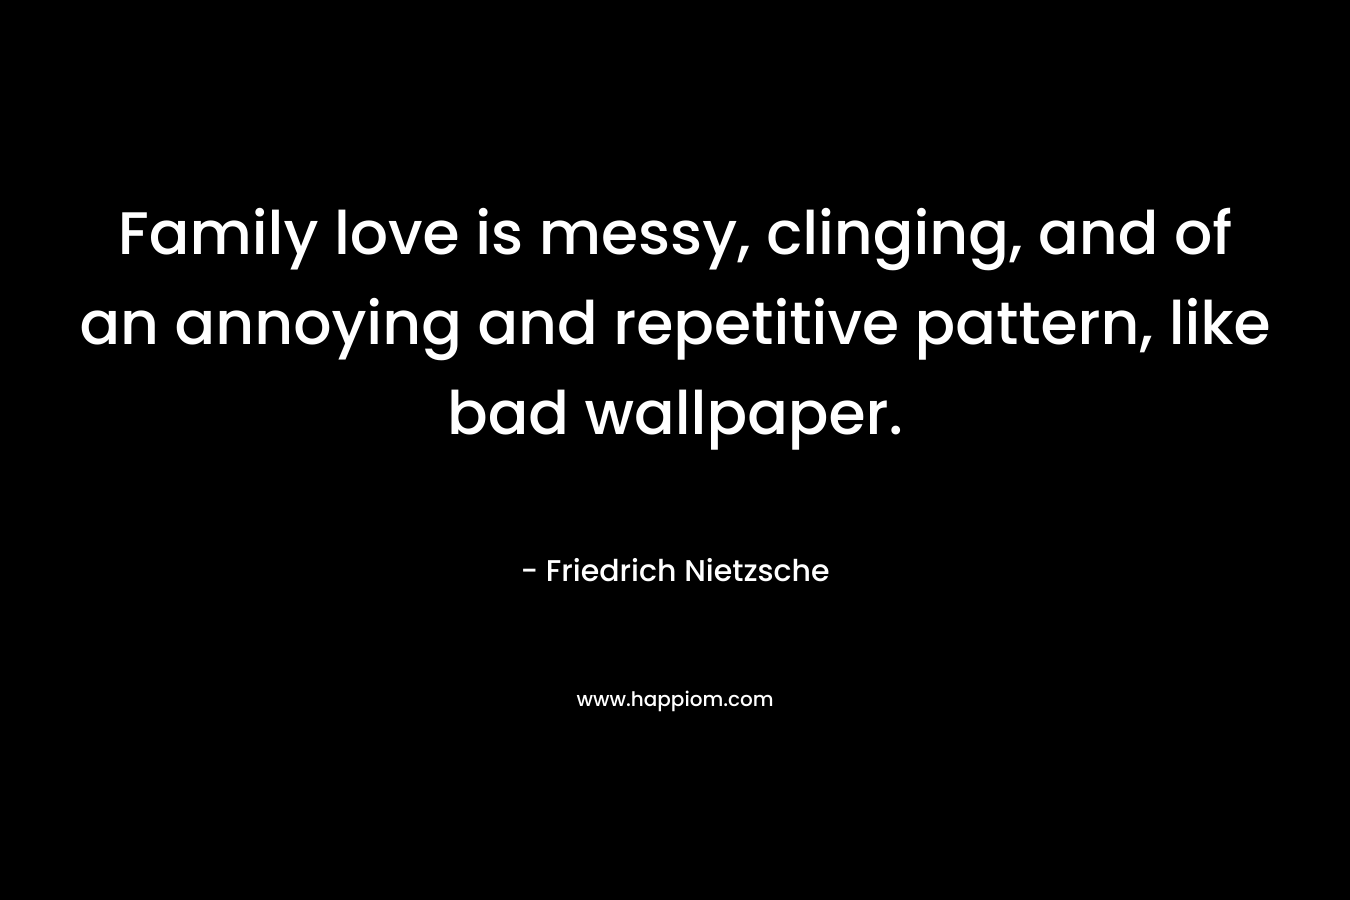 Family love is messy, clinging, and of an annoying and repetitive pattern, like bad wallpaper. – Friedrich Nietzsche